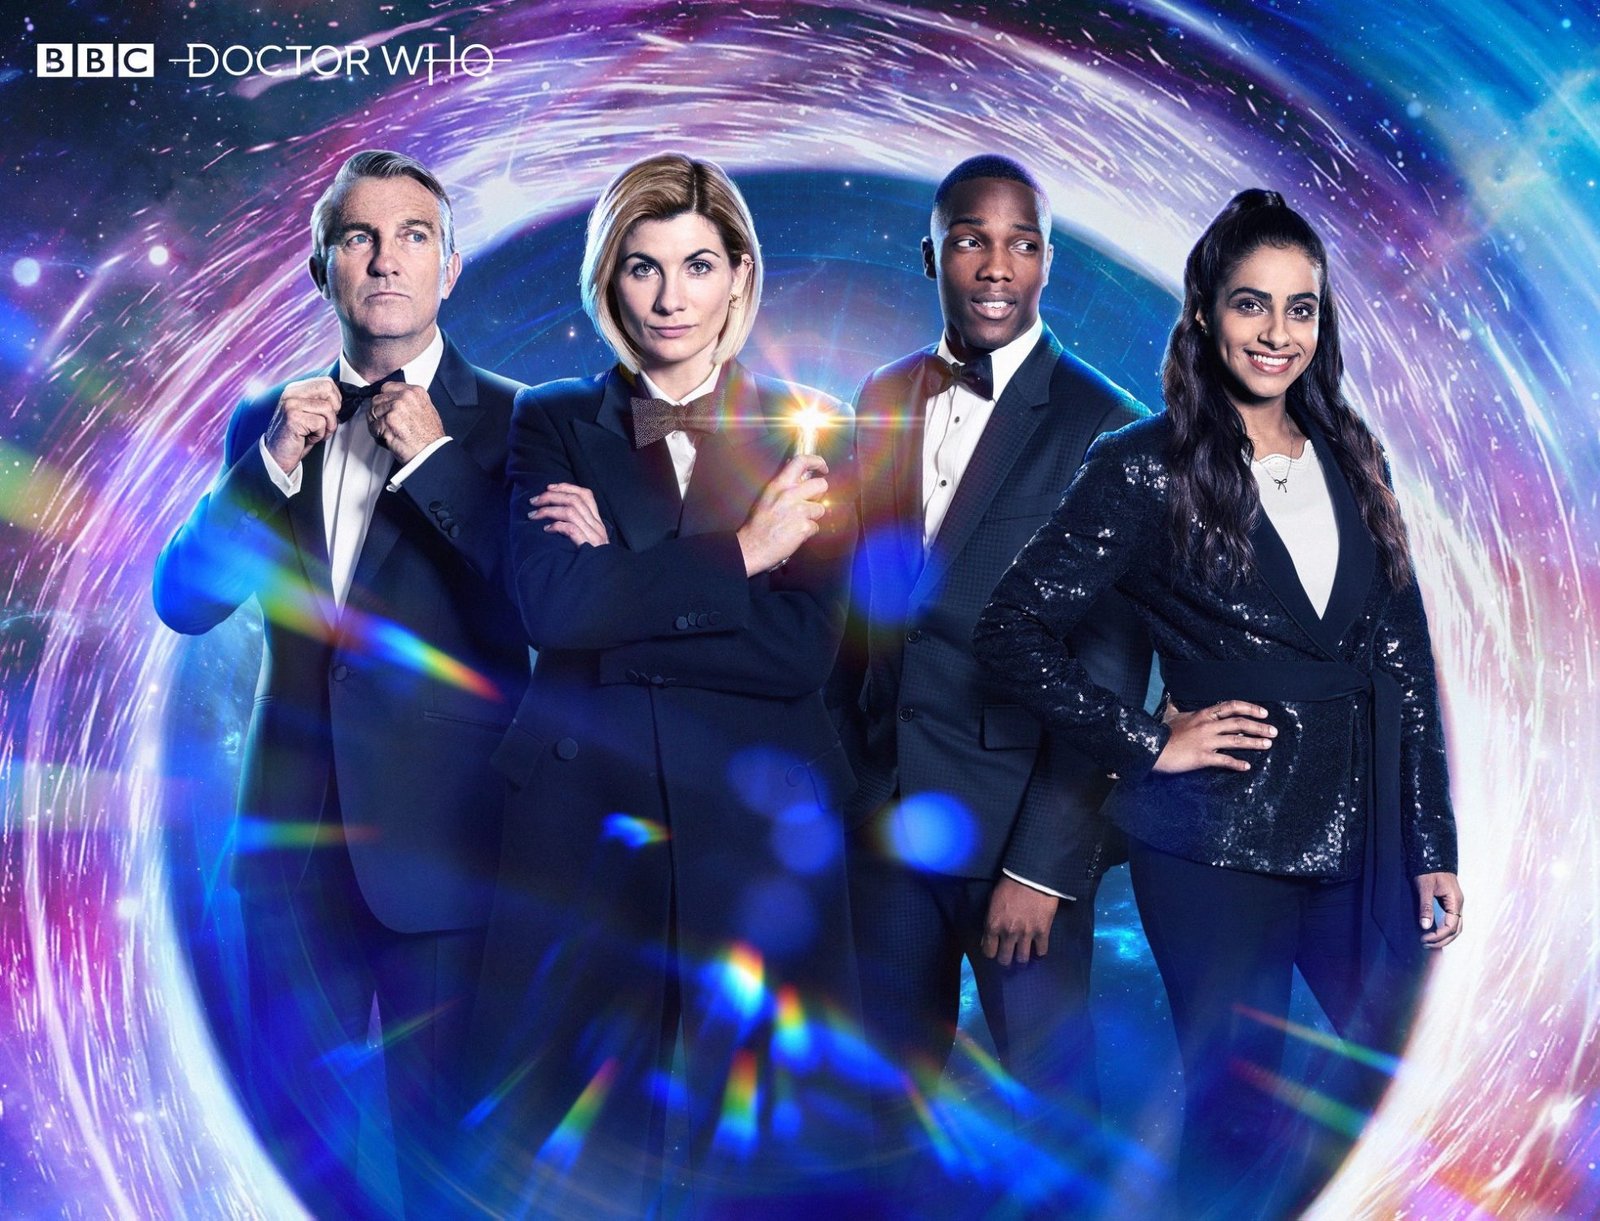 Doctor Who Series 12 Brings Back Two-Parters, Starting with the Opener